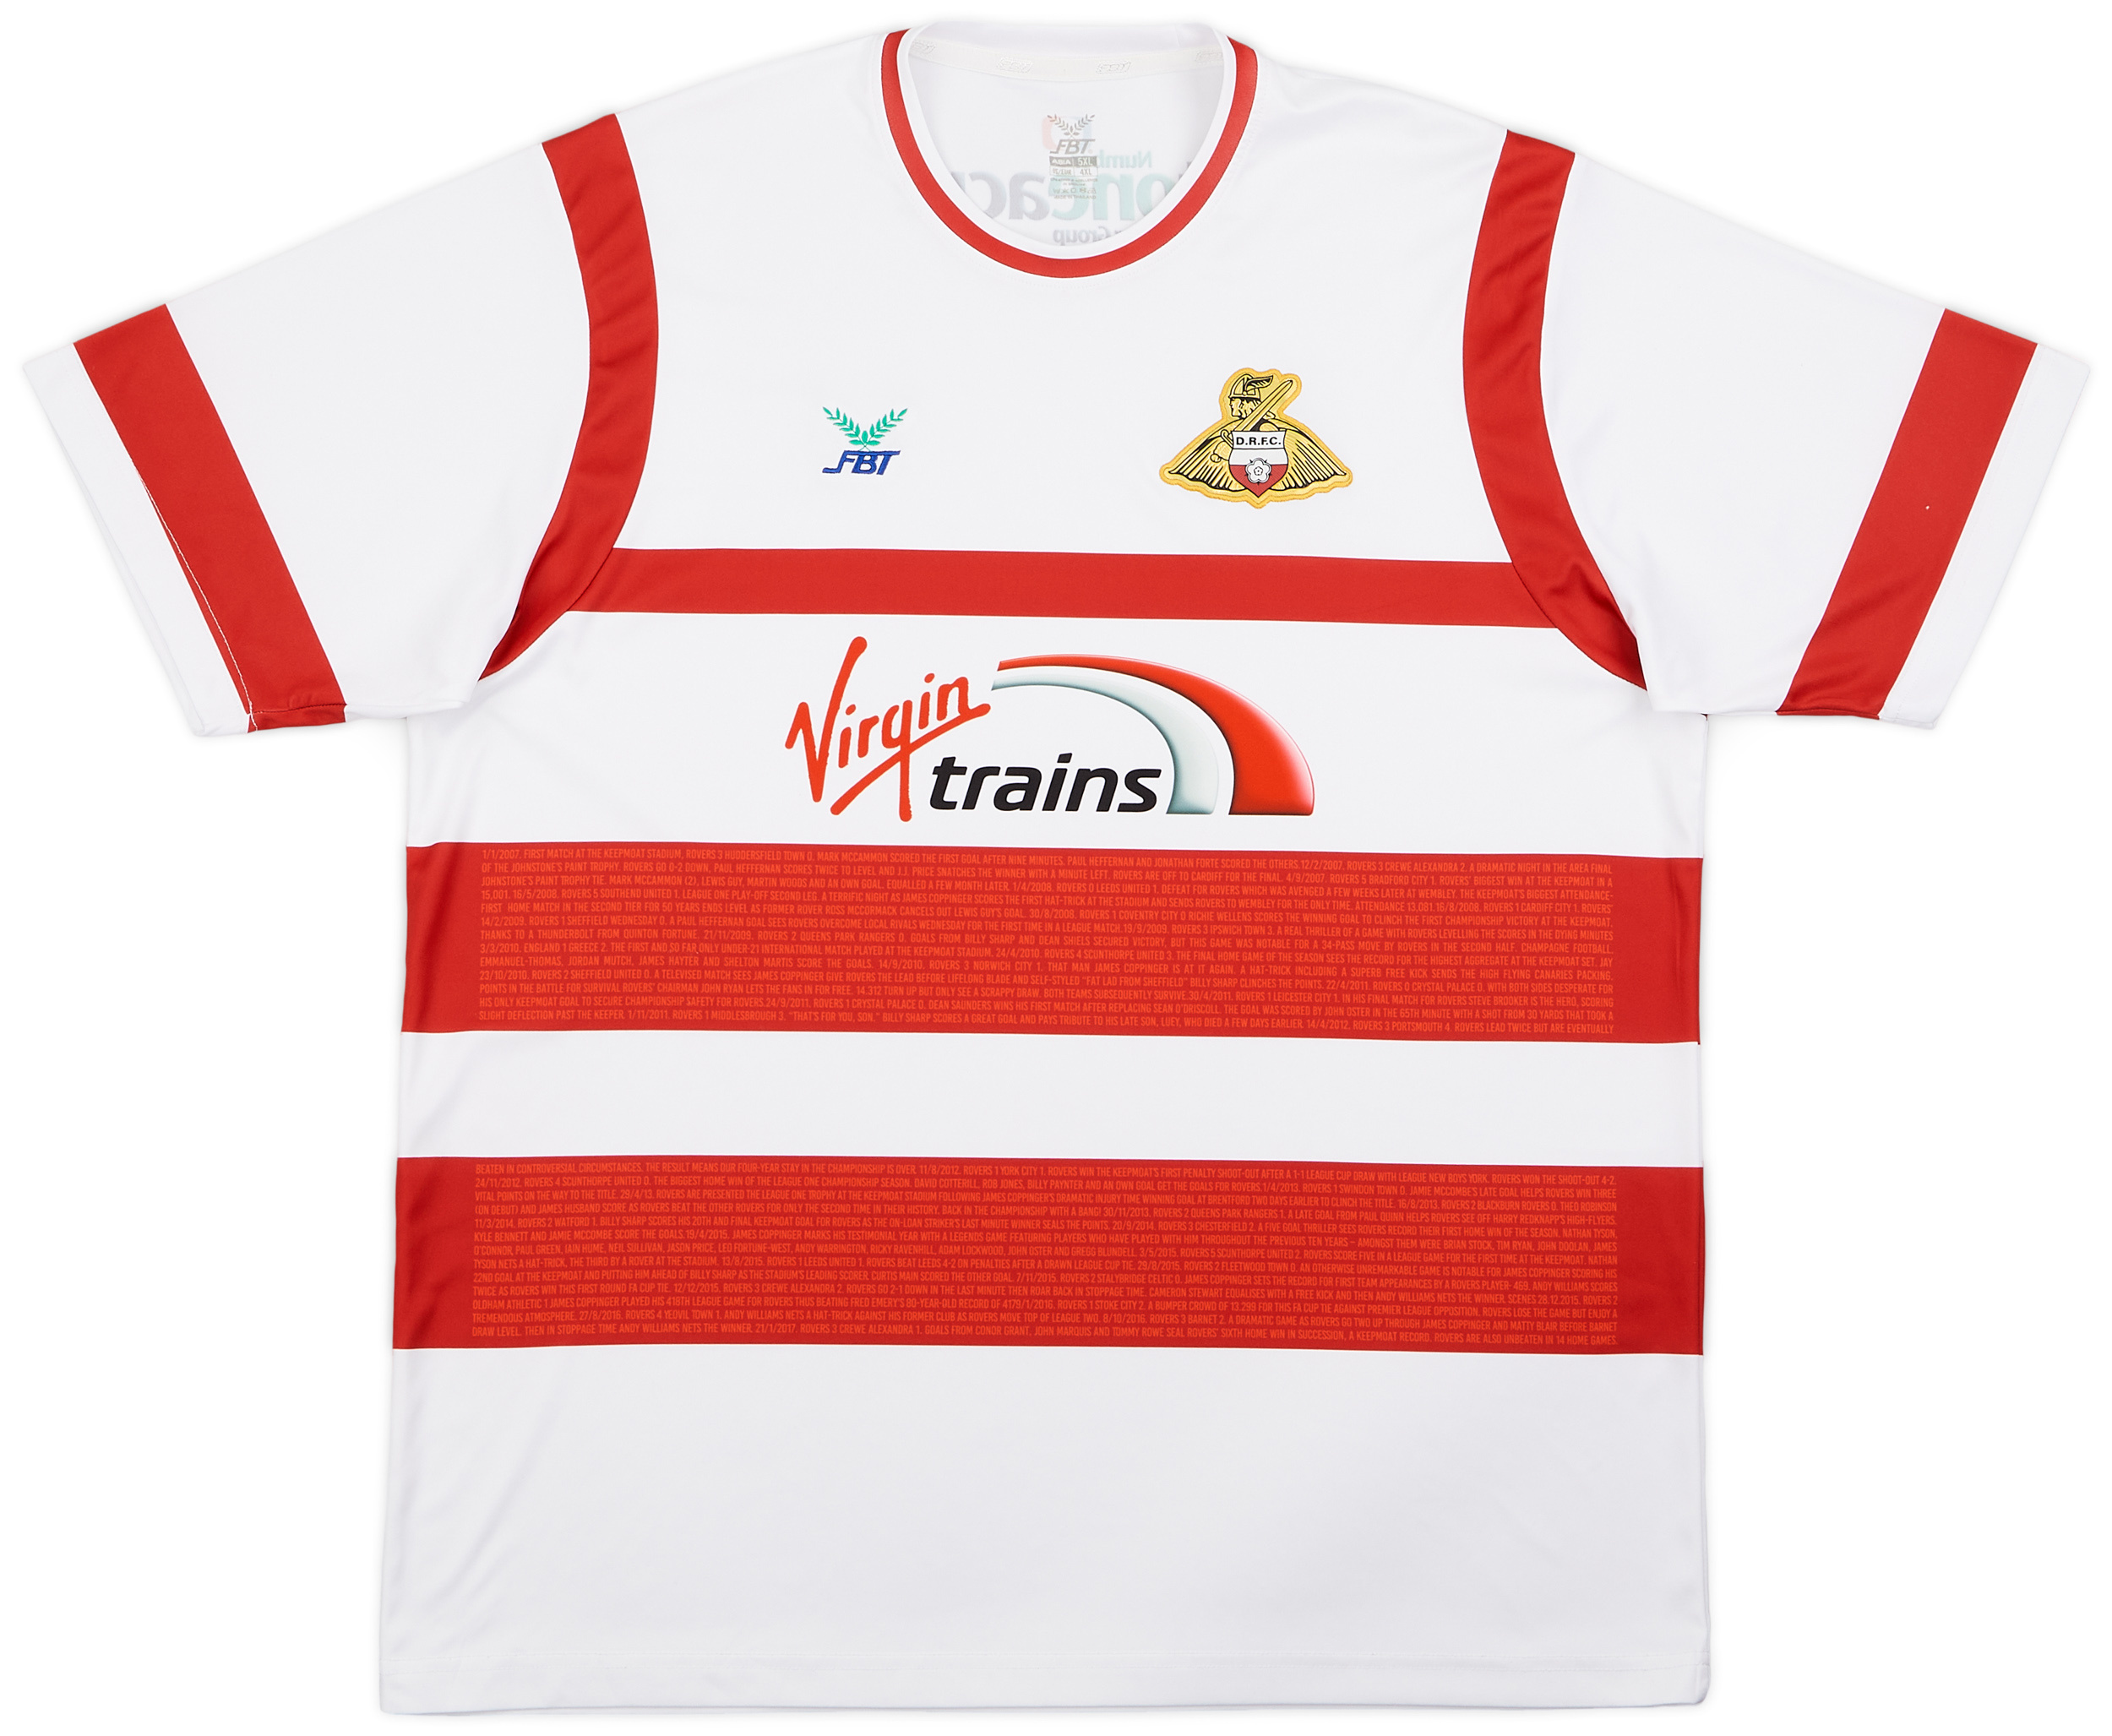 2017-18 Doncaster Rovers Home Shirt - 9/10 - ()